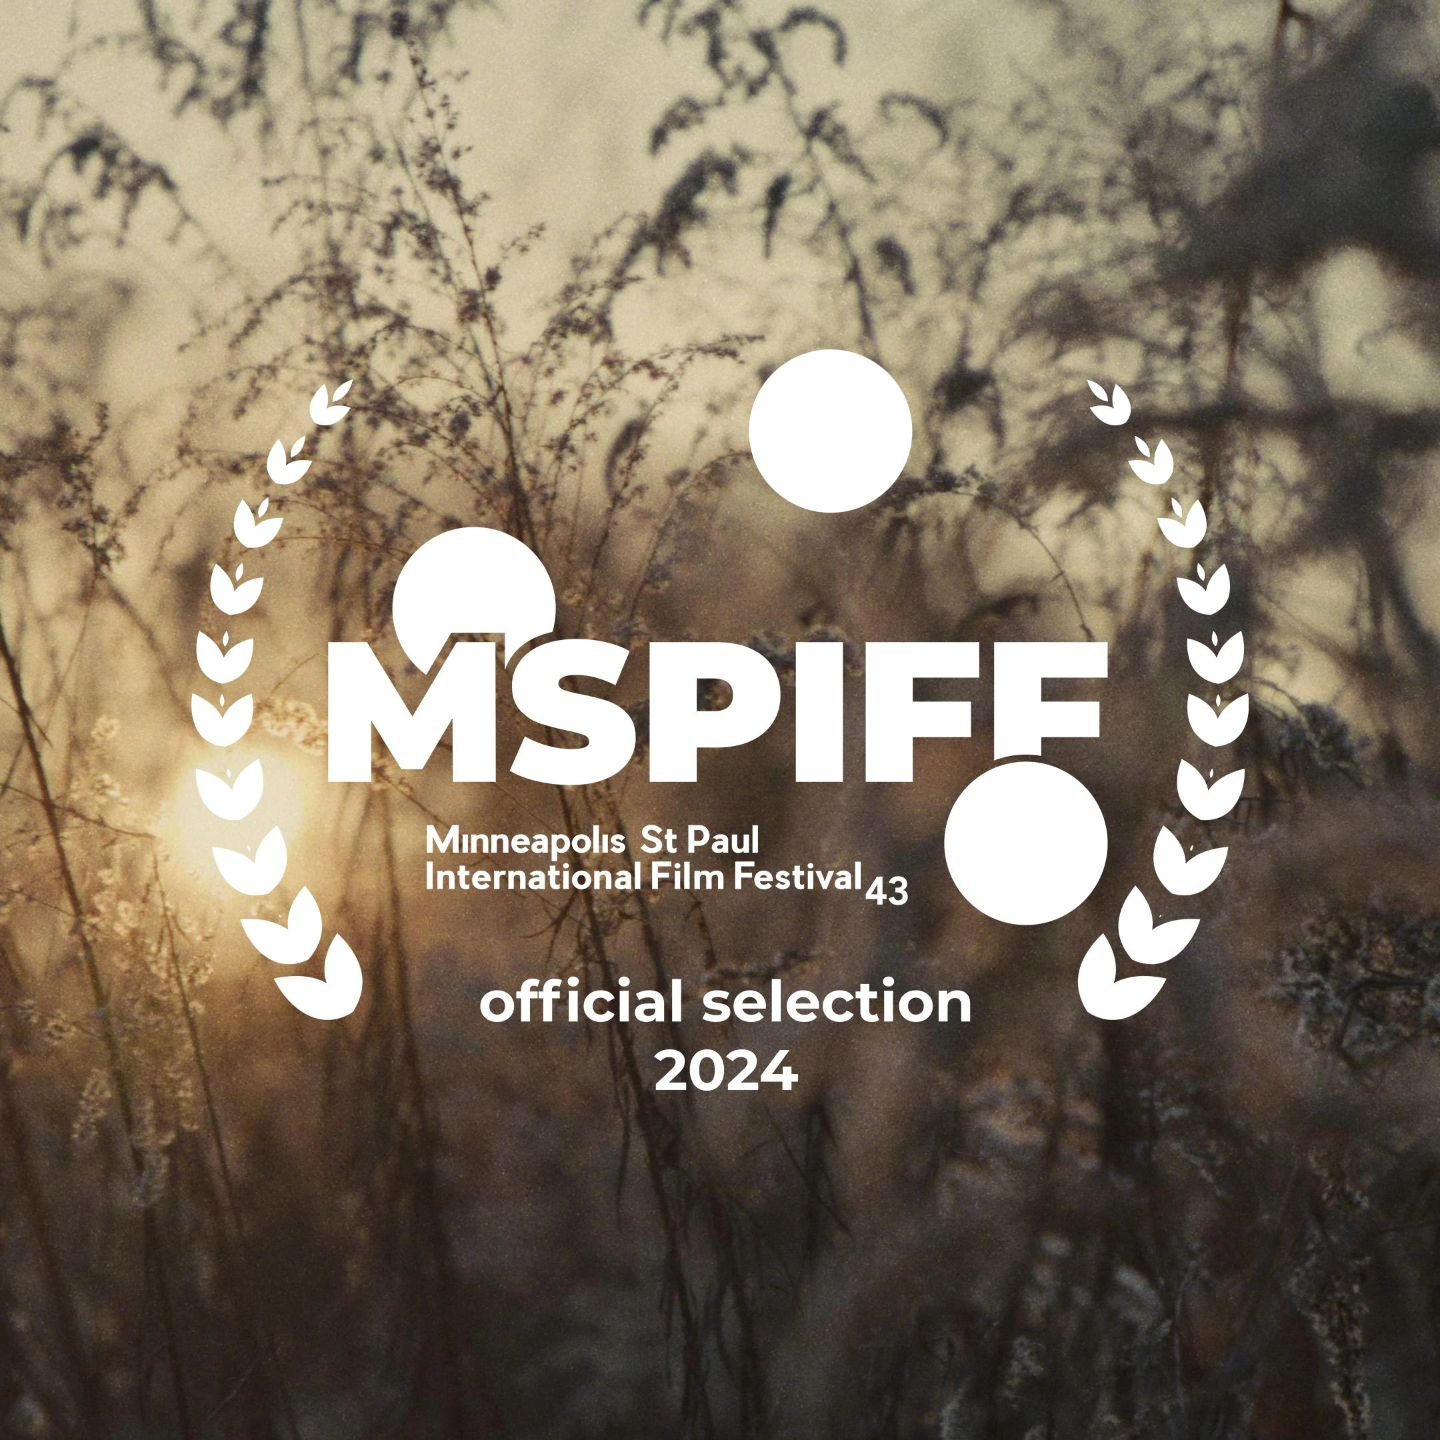 We can't wait to see you at the Minneapolis St. Paul International Film Festival next month!

Screenings:
Thursday April 18 @ 5:00pm 
Friday April 19 @ 7:00pm 
Wednesday April 24 @ 7:15pm